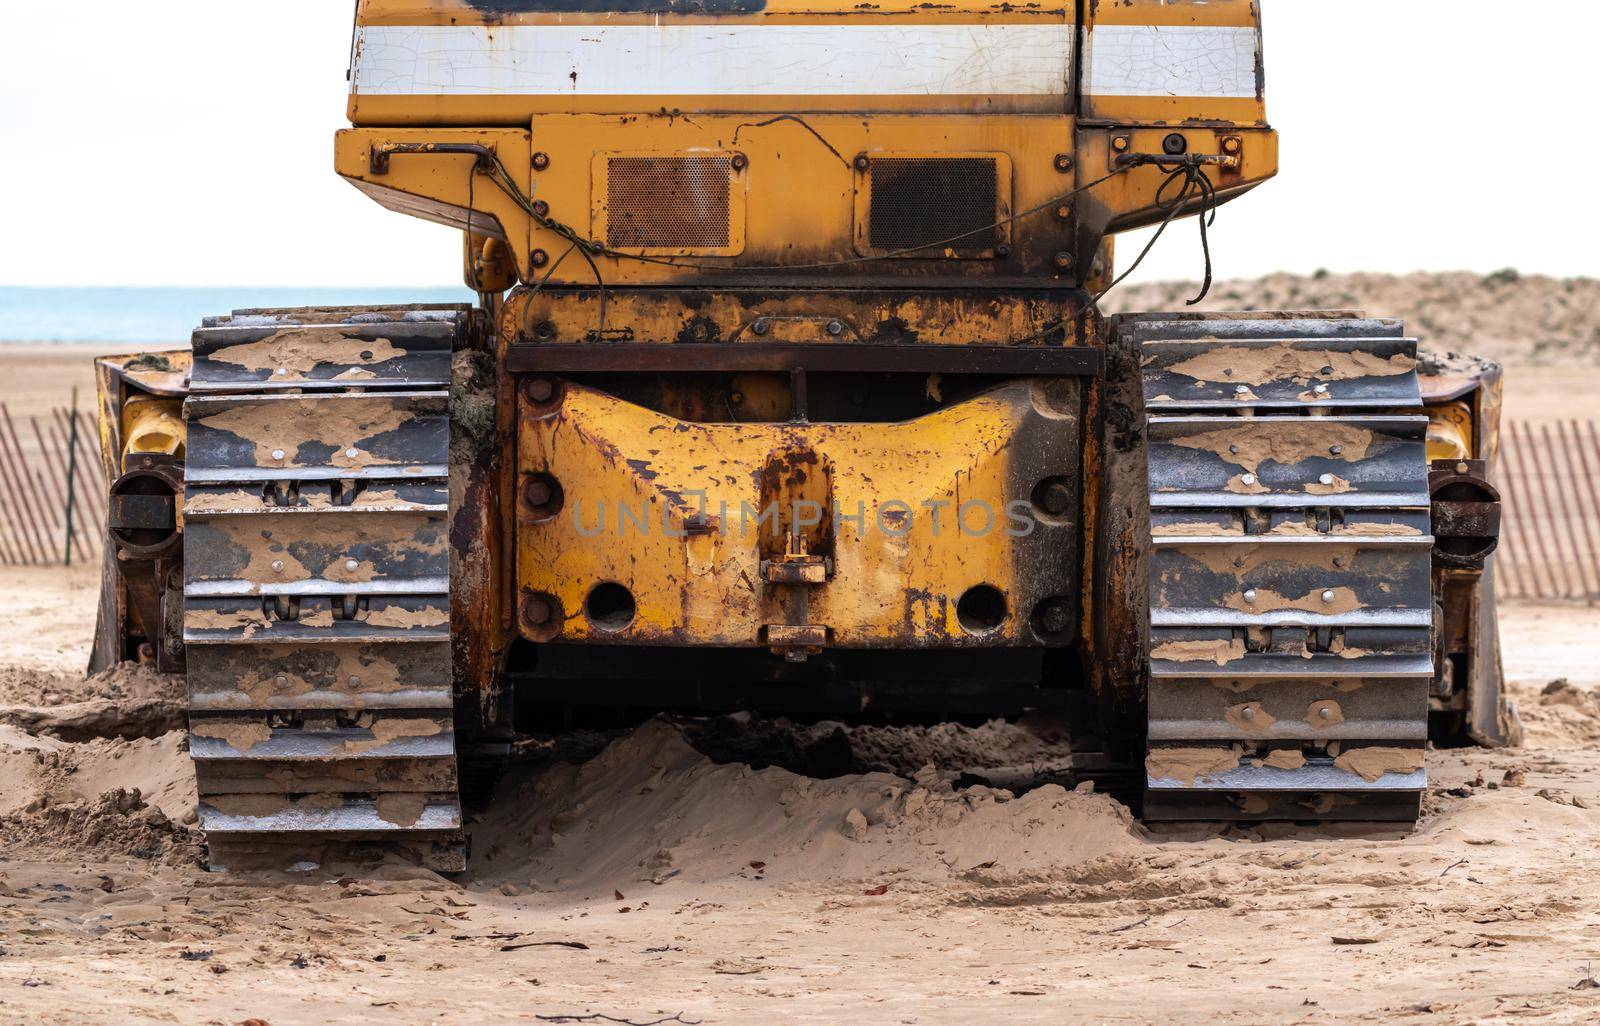 A closeup photograph of the back of an old large industrial yellow bulldozer machine weathered, worn and rusty sitting on a beach in Chicago.